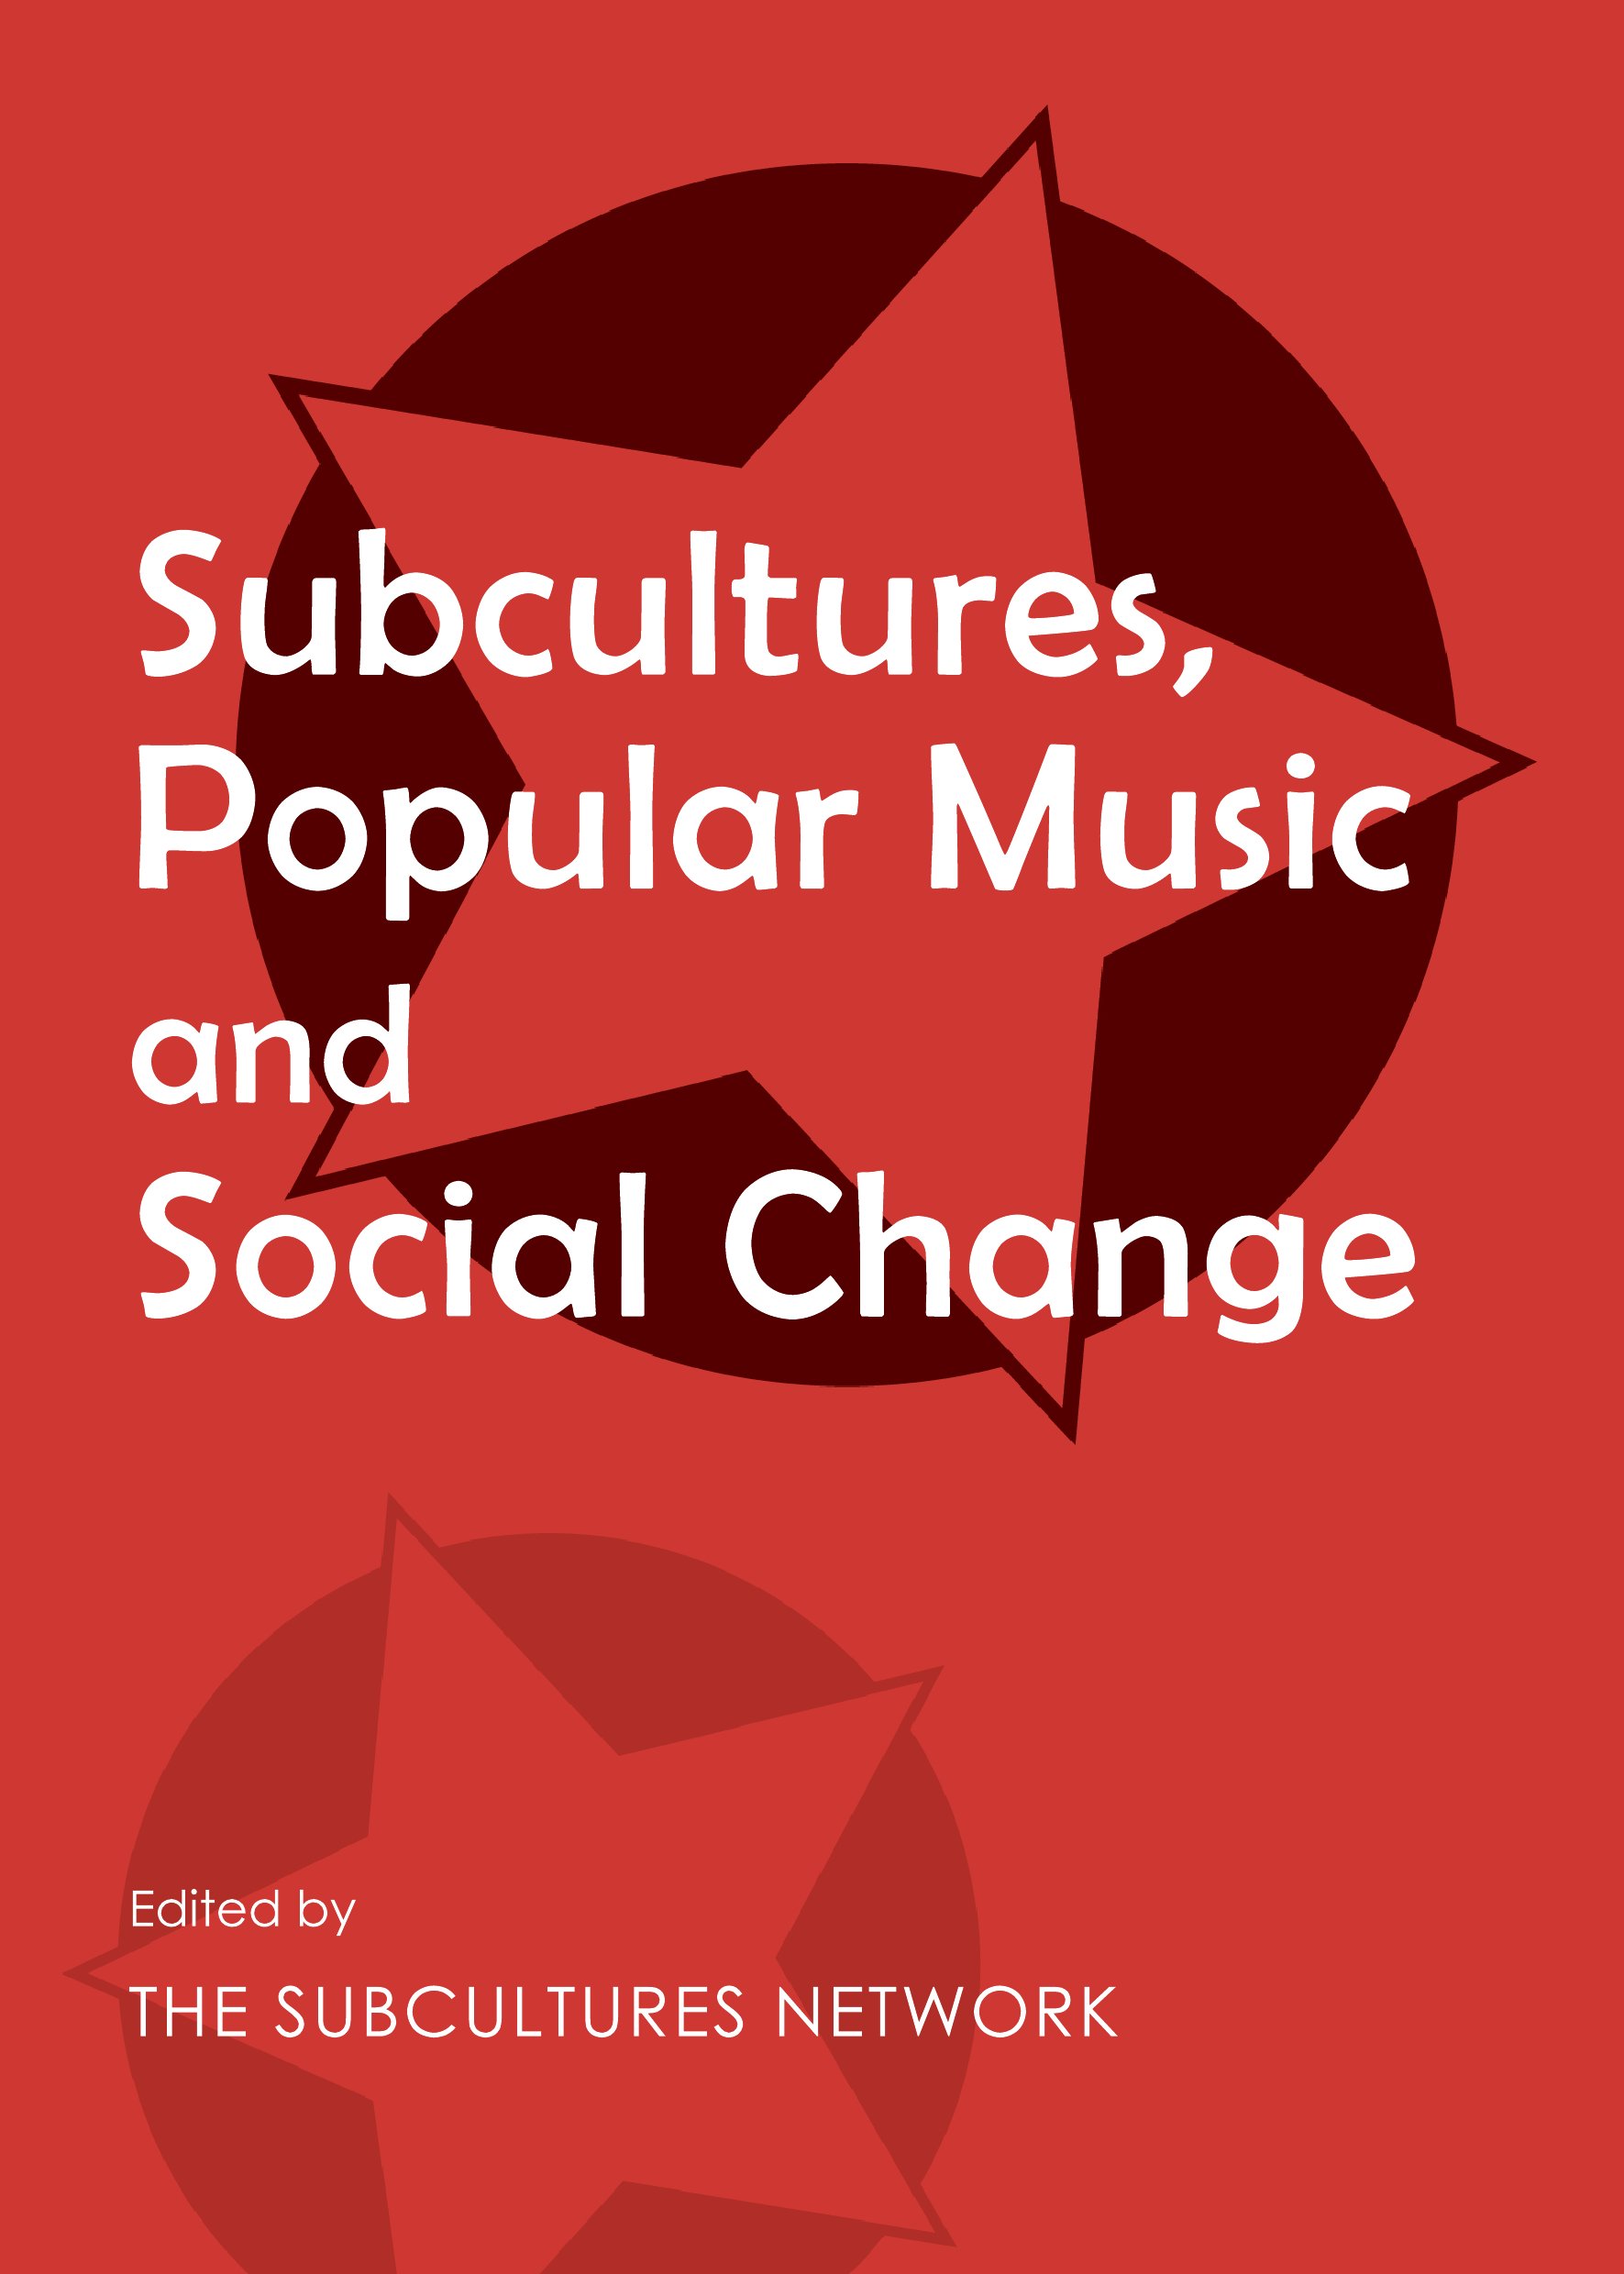 Subcultures, Popular Music and Social Change